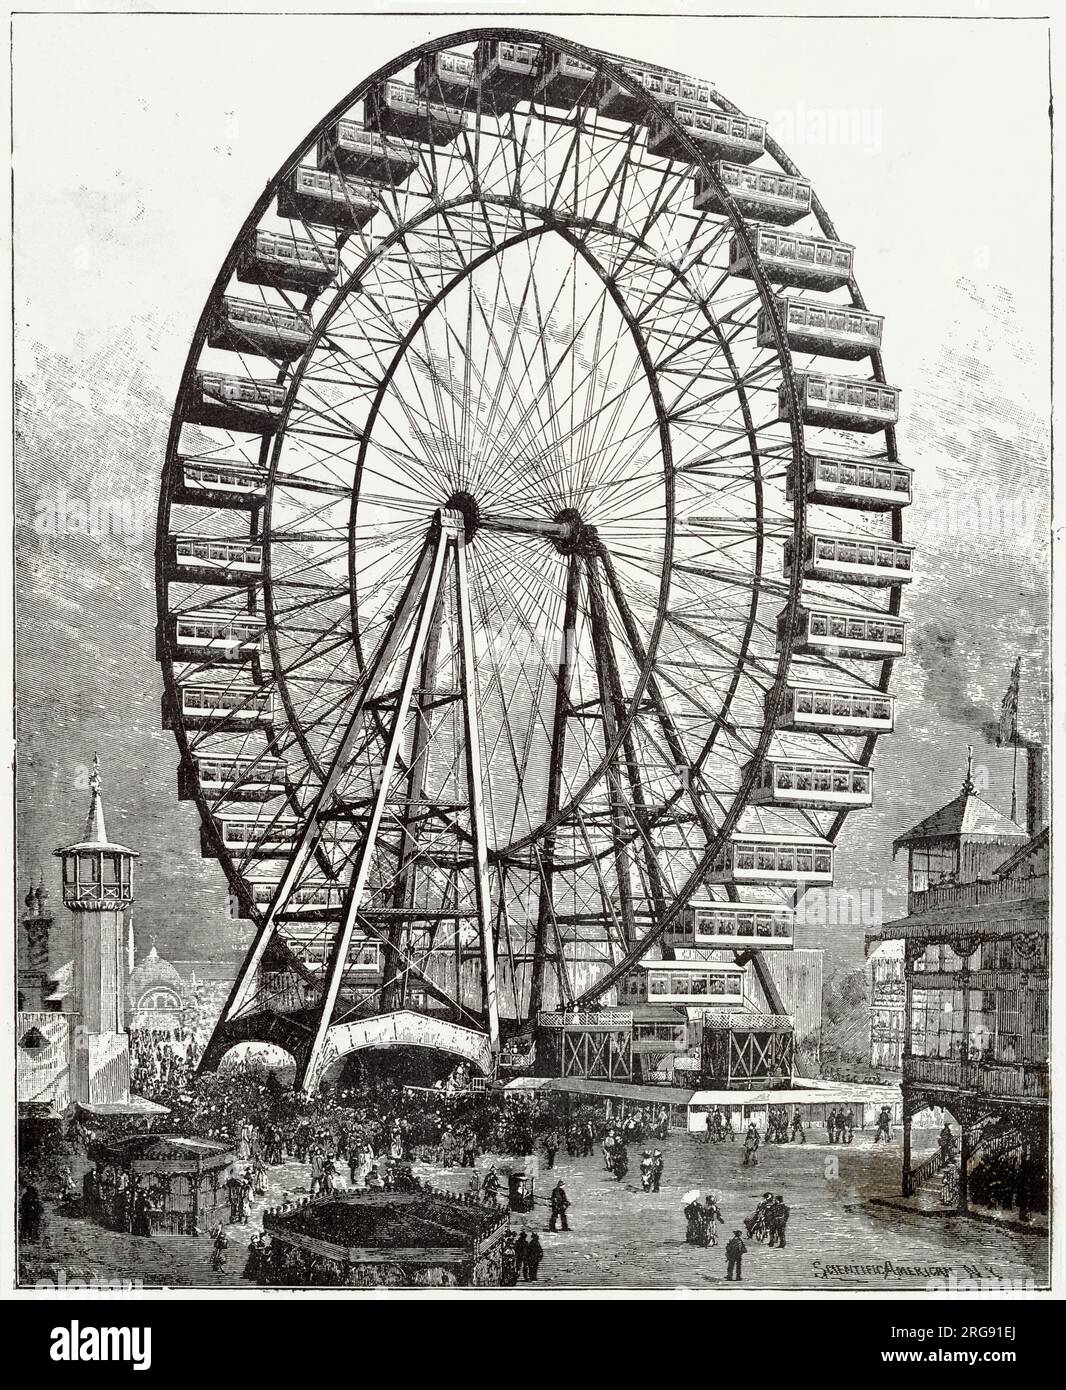 Attraction at the Chicago's World's Fair, designed and built by George Washington Gale Ferris Jr. The ferris wheel named the Chicago Wheel, had thirty-six pendulum cars, each seating forty passengers, carrying 1,440 people at its height. Stock Photo